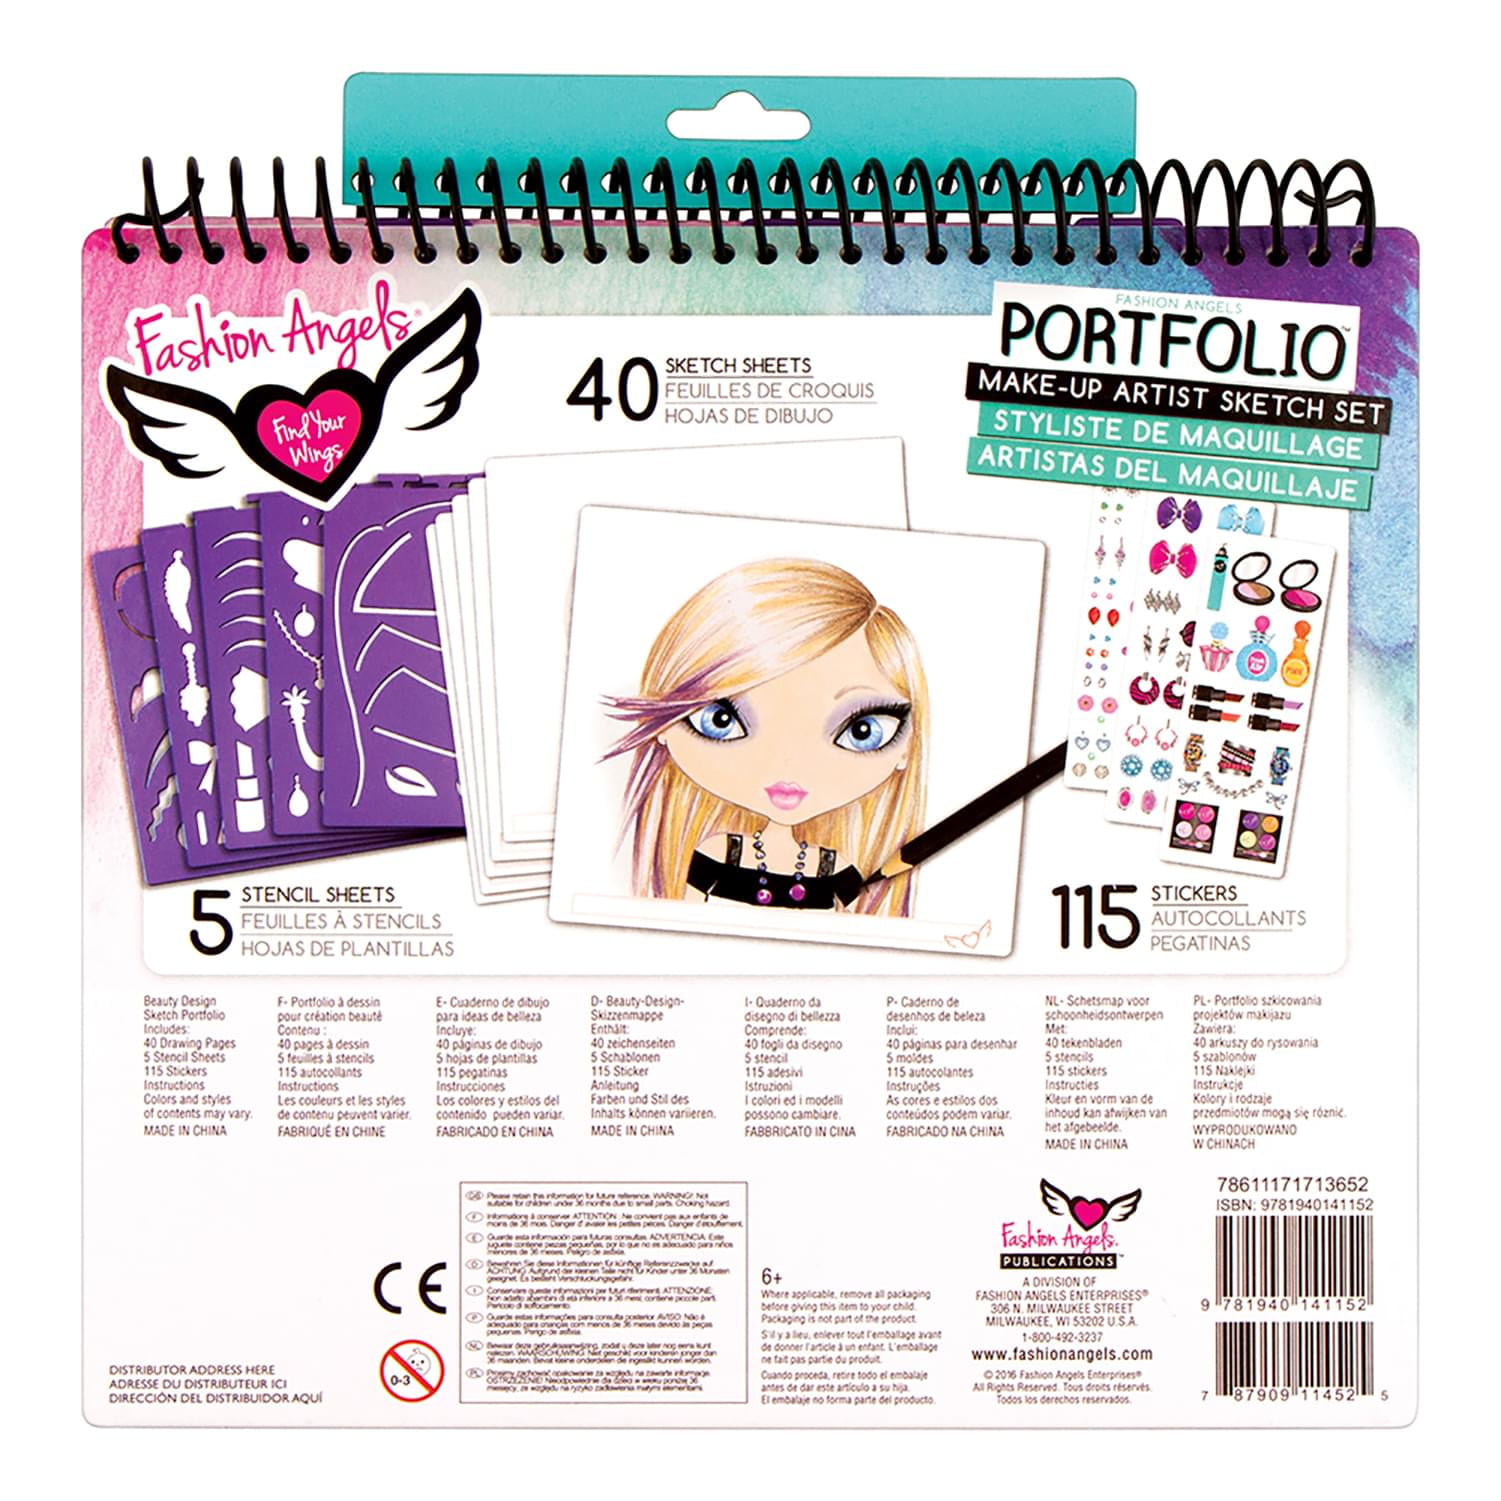 Fashion Angels Makeup & Fashion 2 in 1 Sketch Portfolio - 60+ Sketch  Sheets, and 12 Tracing Sheets - Girls Drawing - Beauty and Fashion Plates 